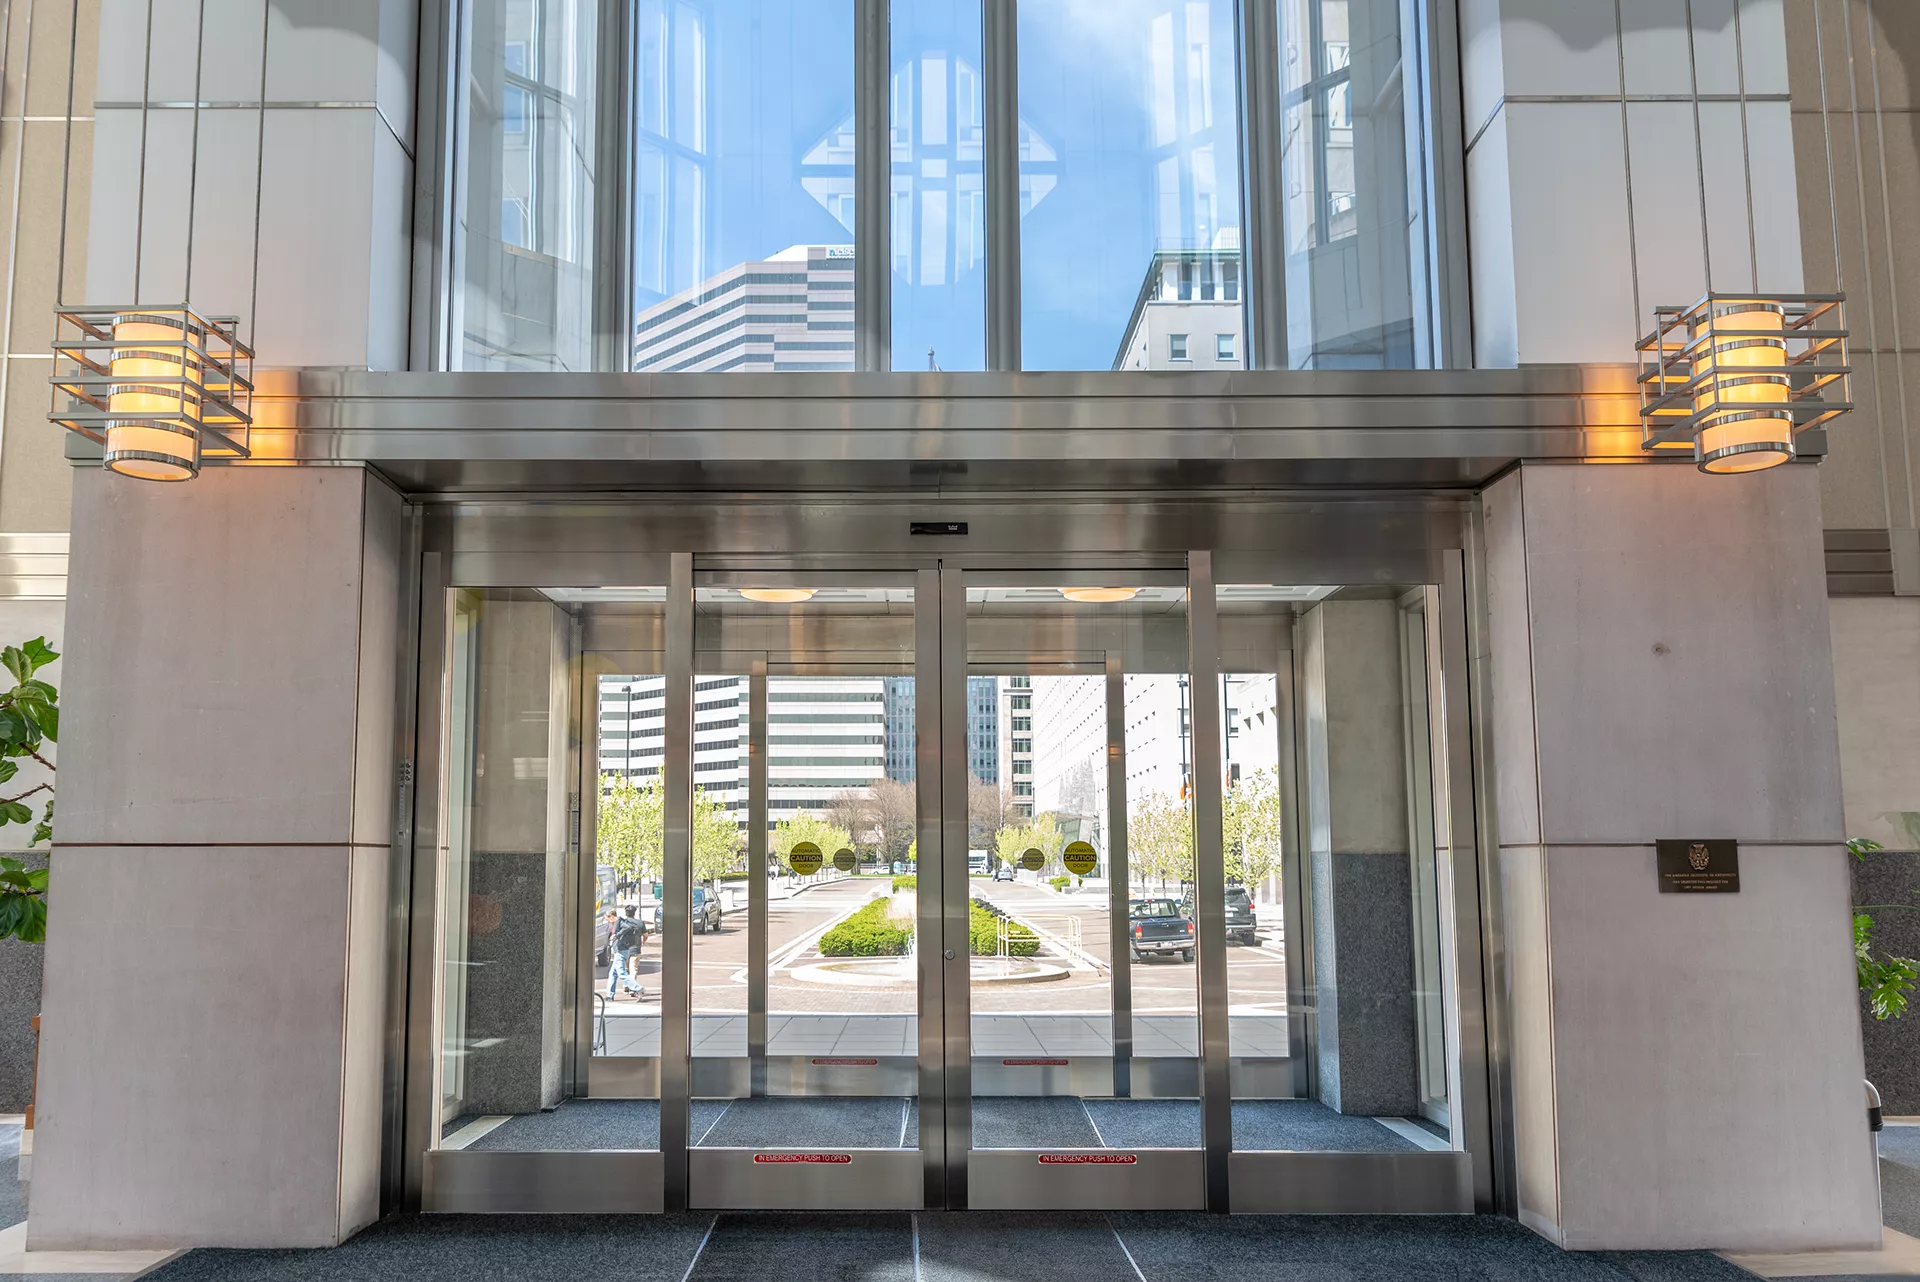 Proctor and Gamble silver automatic doors